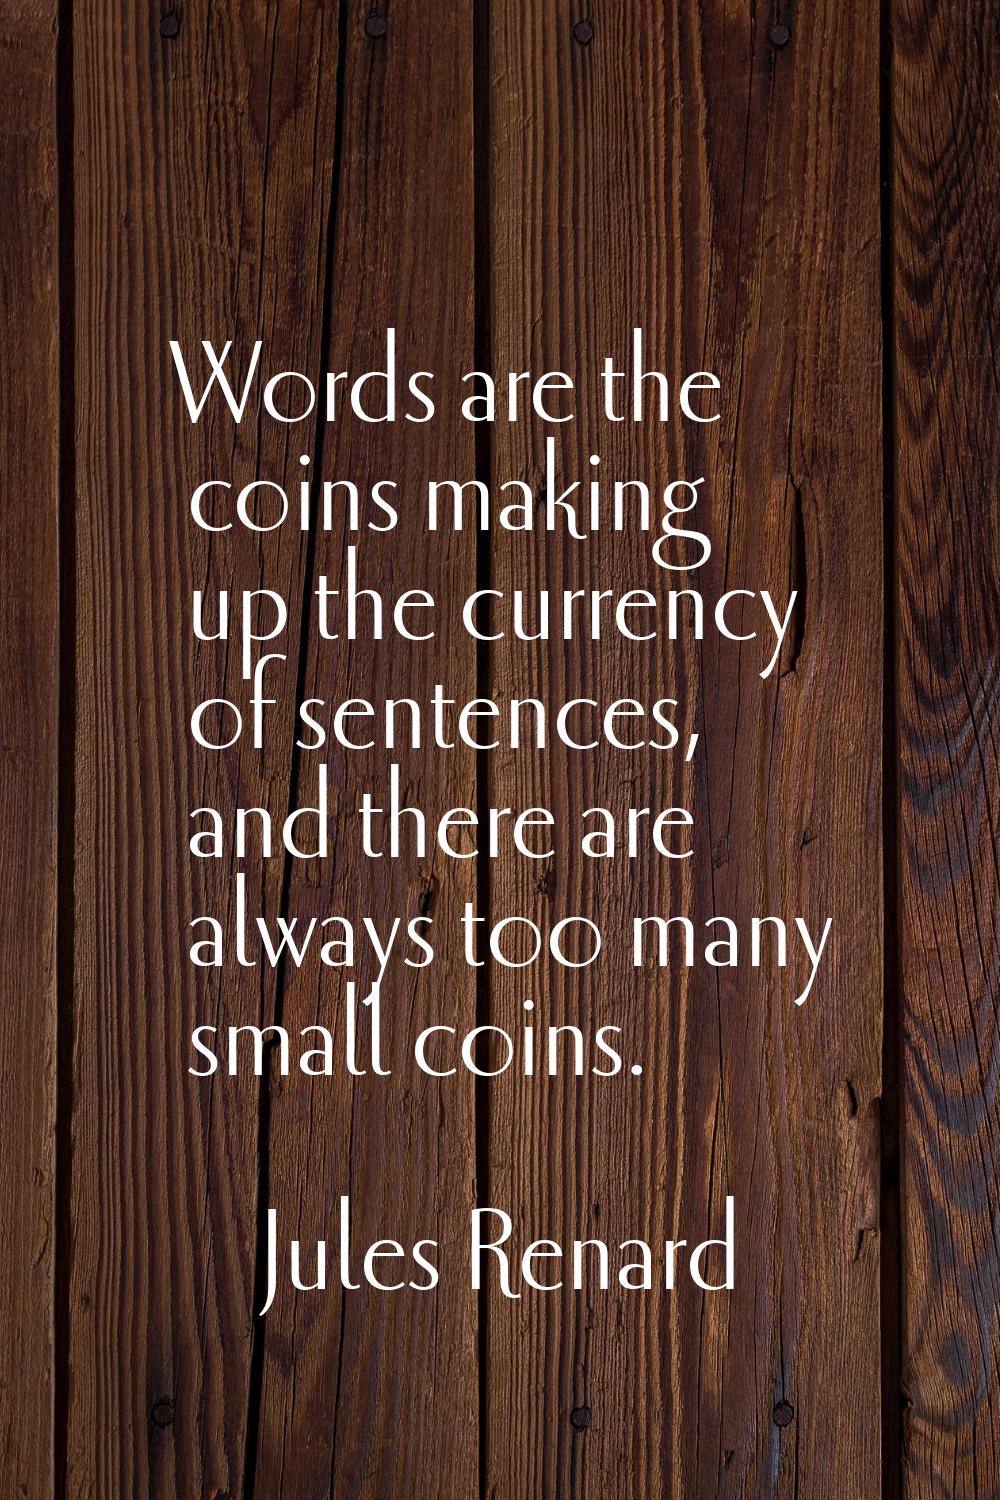 Words are the coins making up the currency of sentences, and there are always too many small coins.